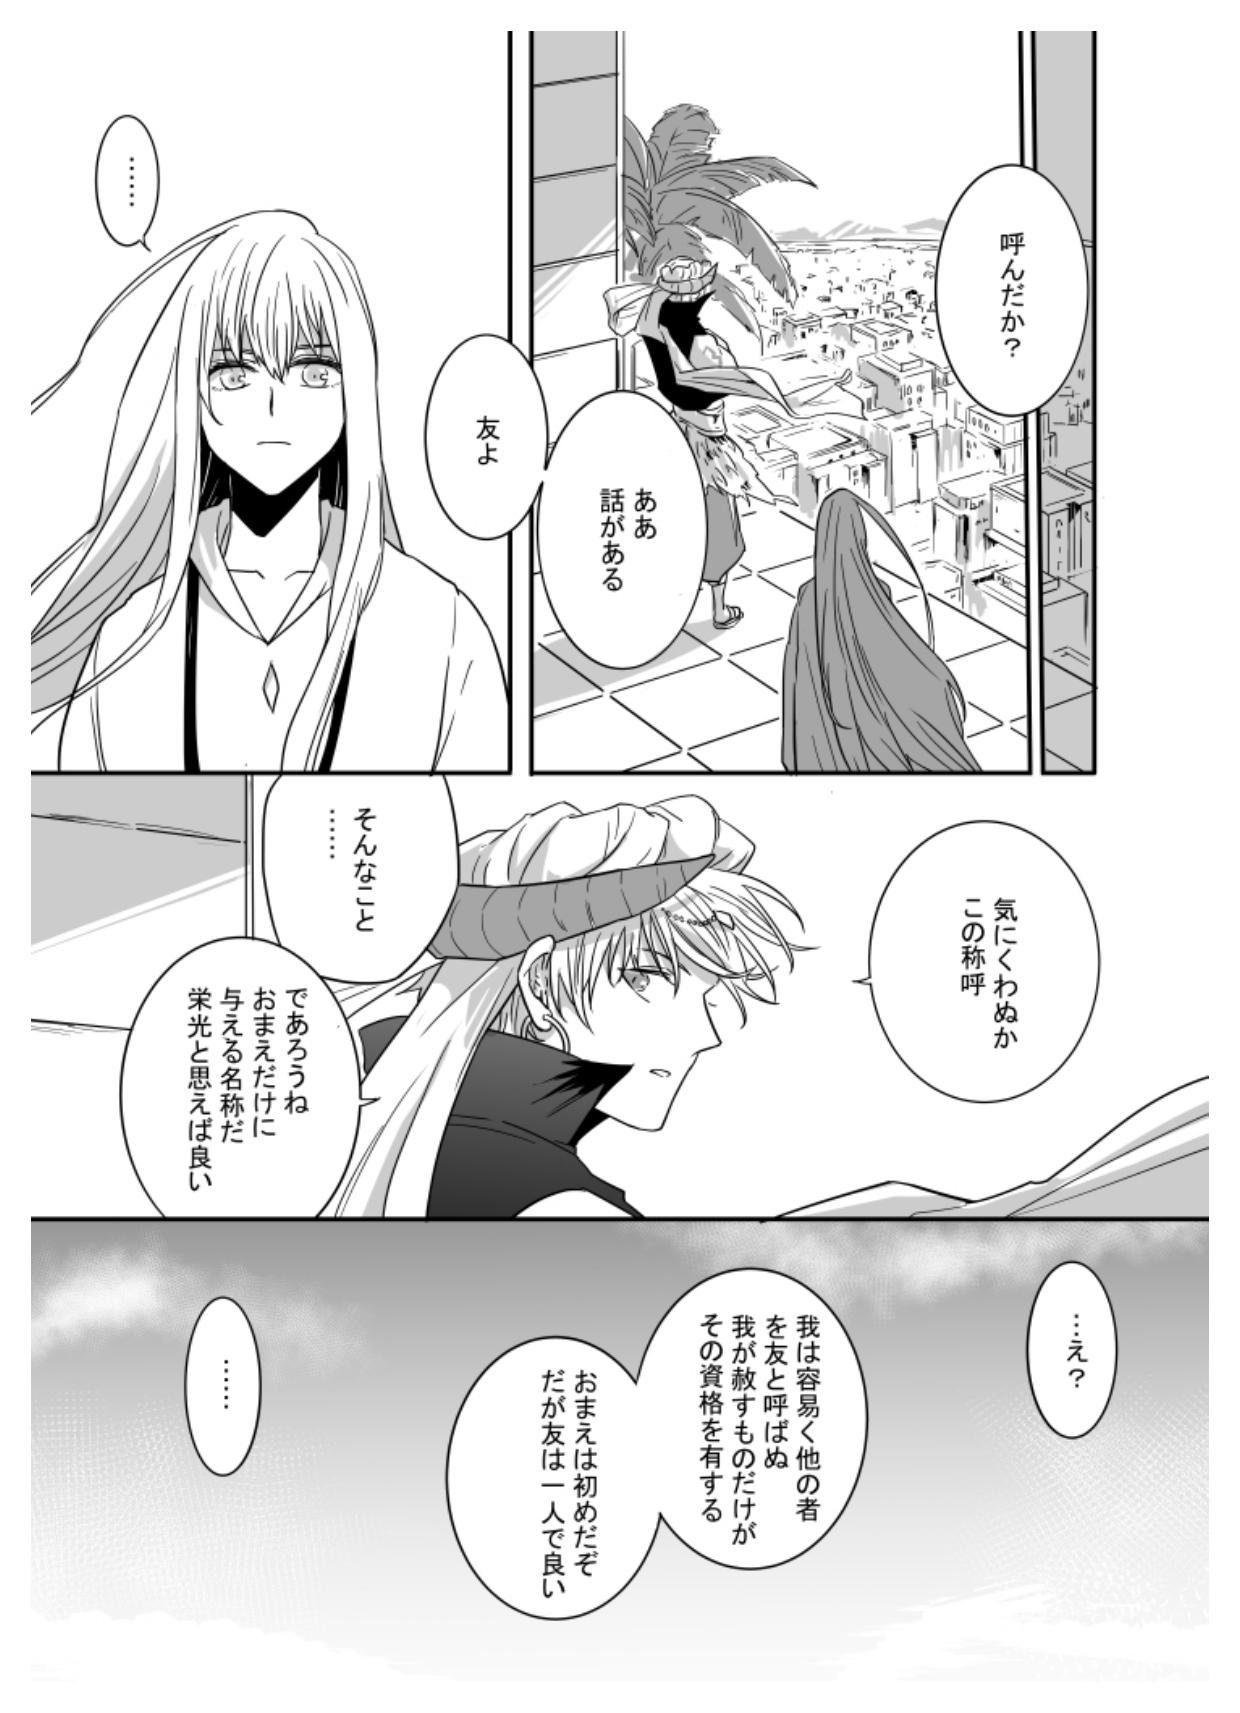 Woman If I have soul - Fate grand order Grandmother - Page 11